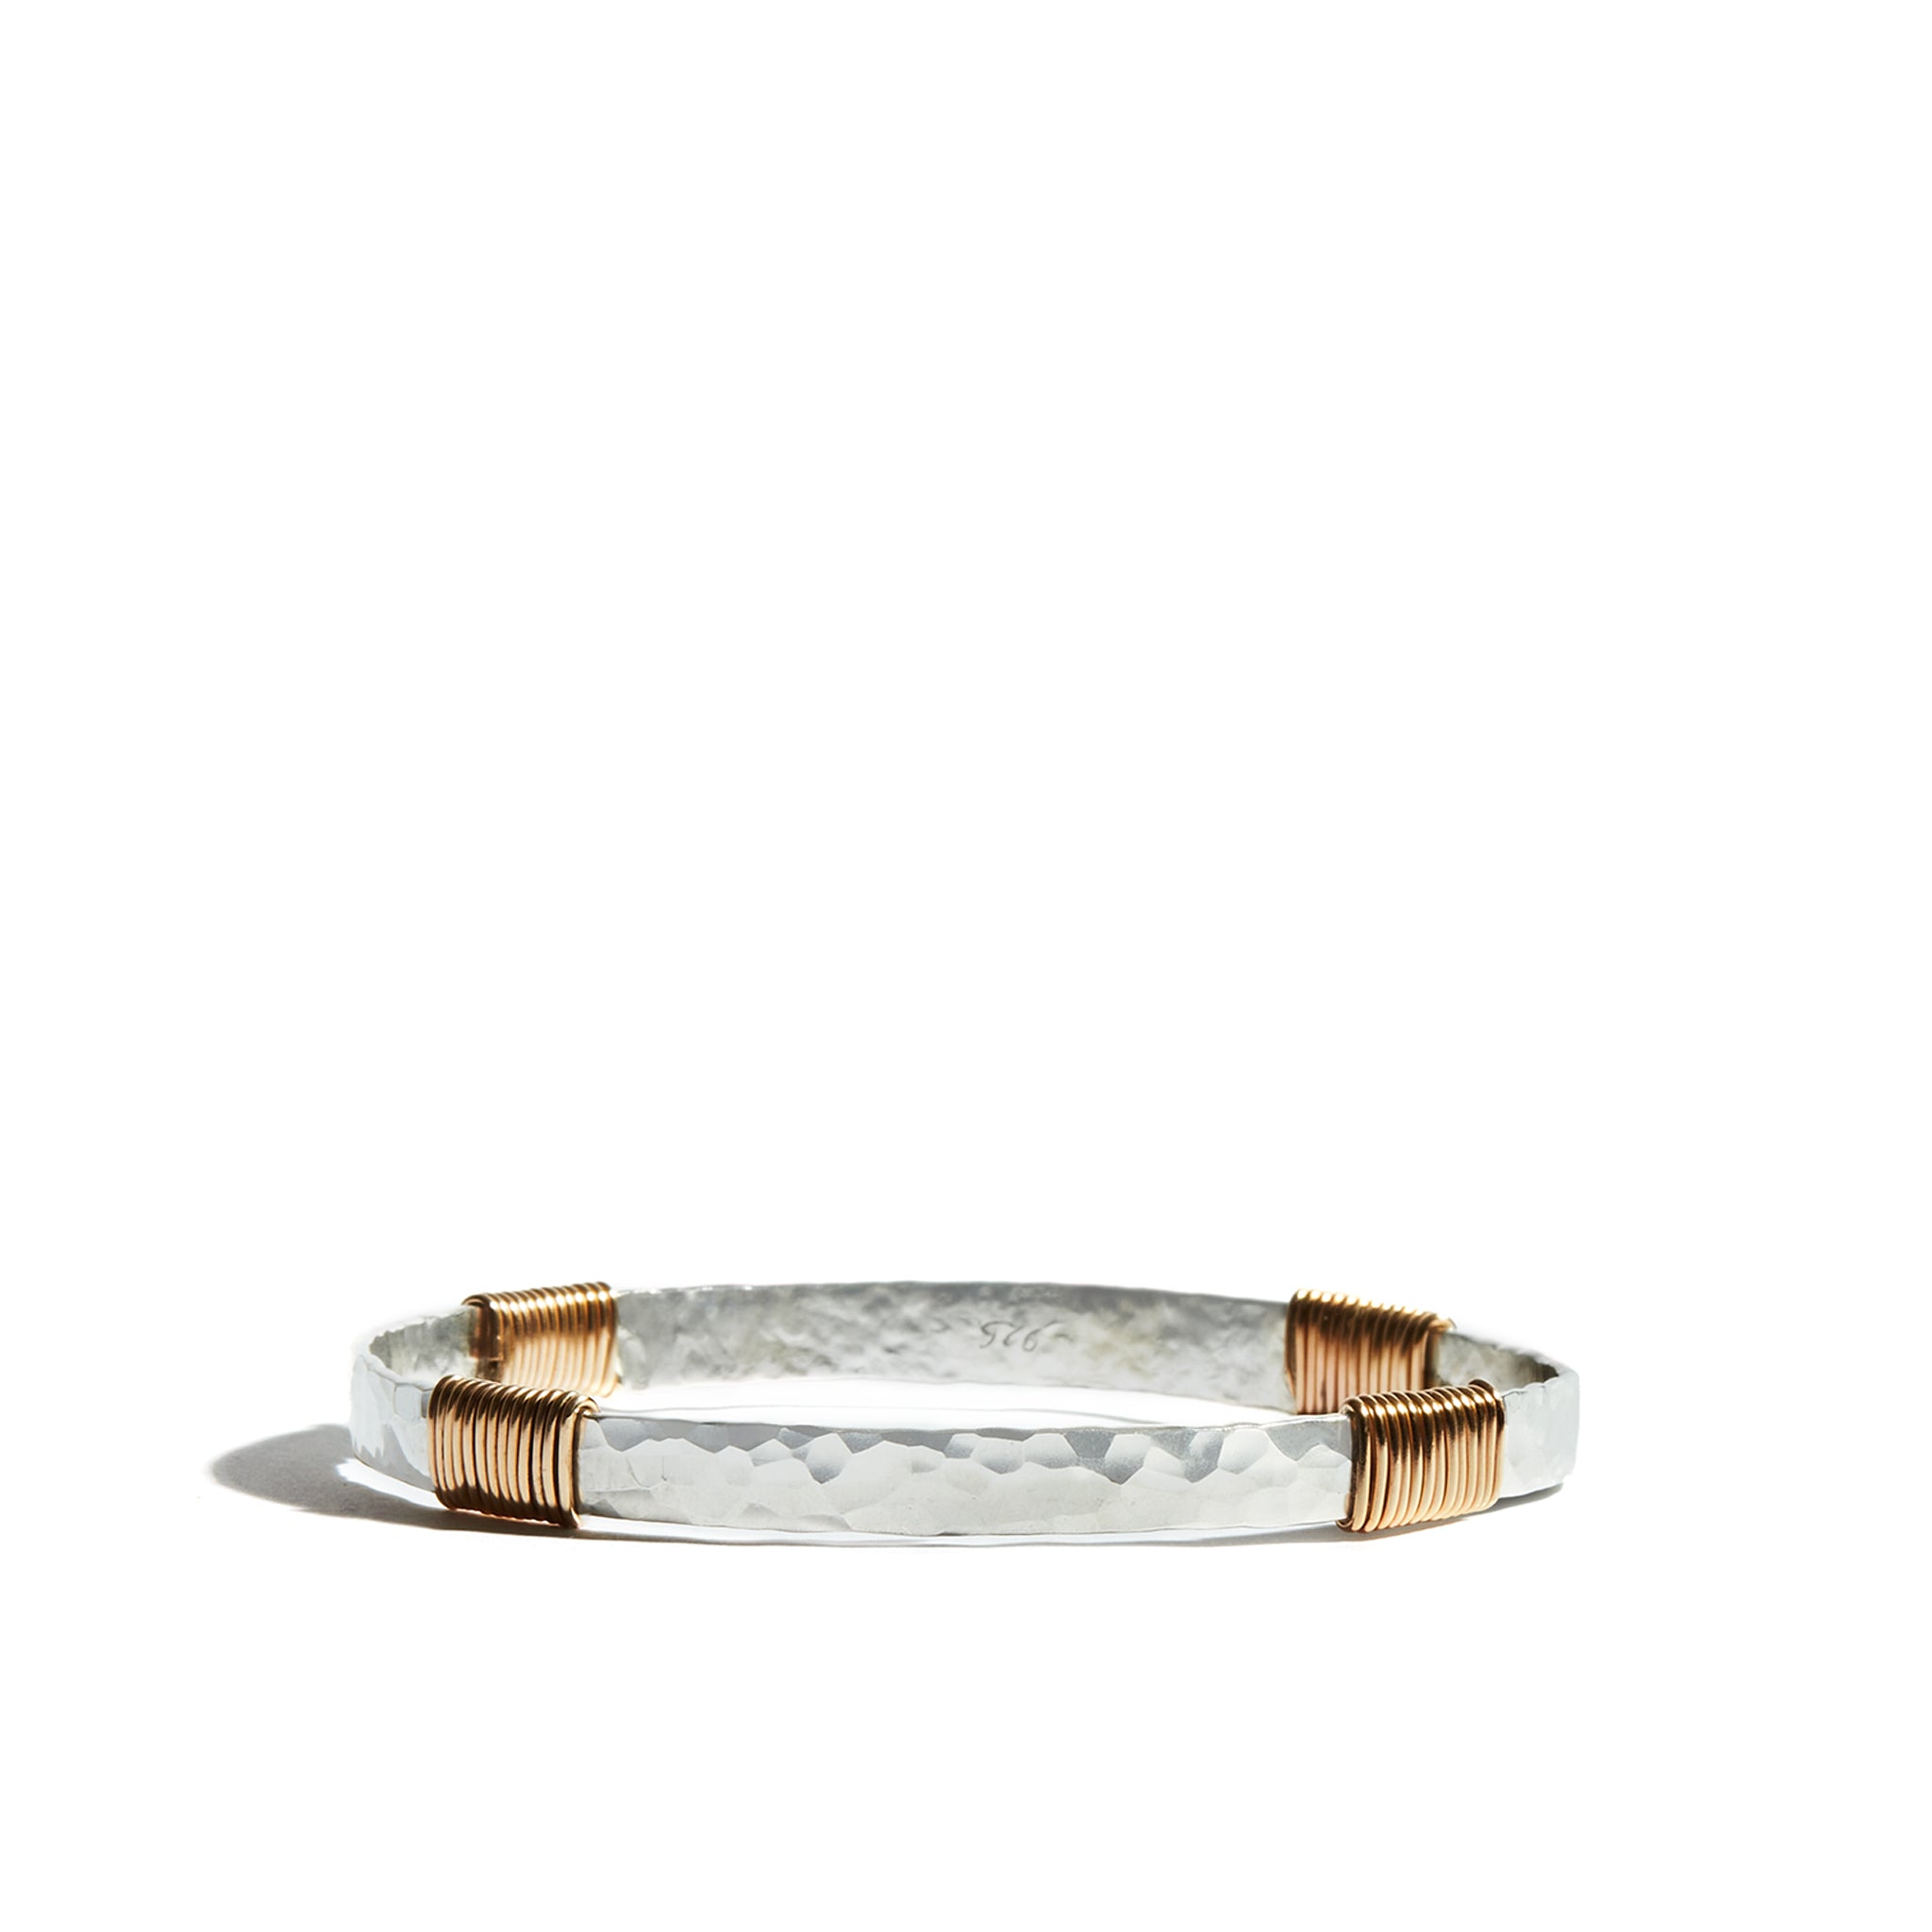 A stylish sterling silver bangle with wrap details made from 14ct gold fill, perfect for adding a touch of elegance to any look.